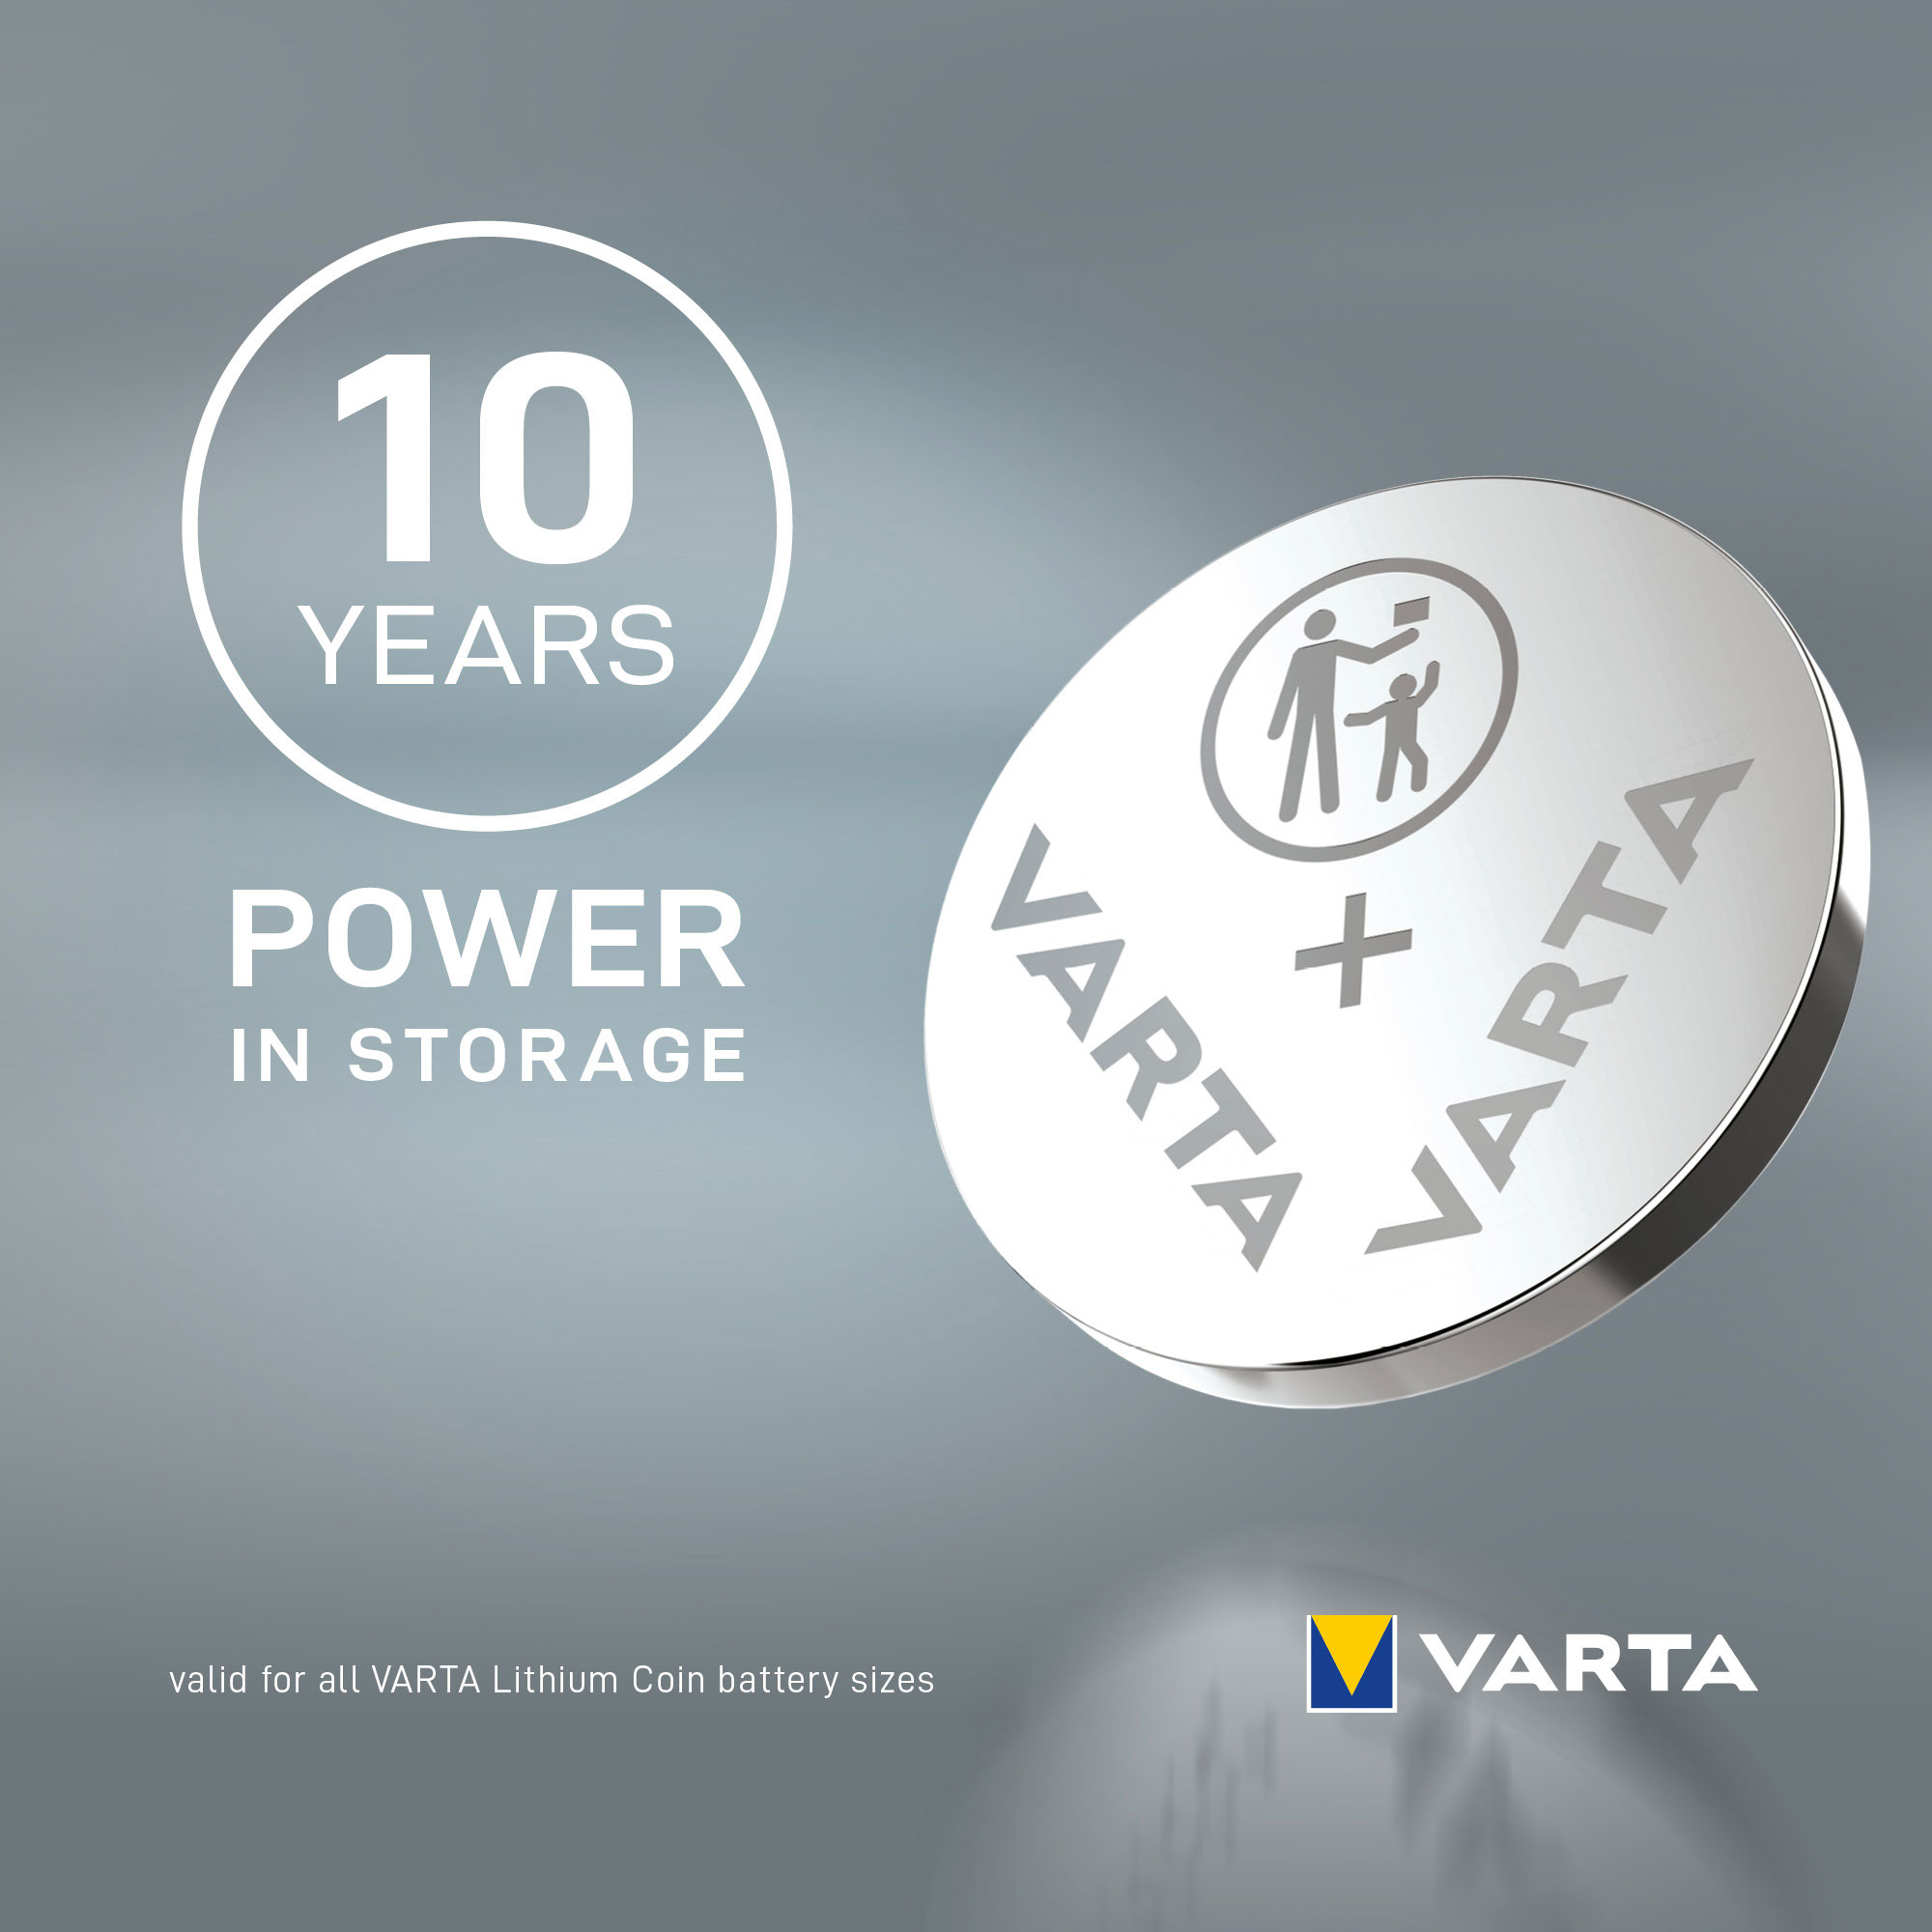 VARTA LITHIUM COIN CR2450 (BUTTON CELL BATTERY, 3V) PACK OF 1